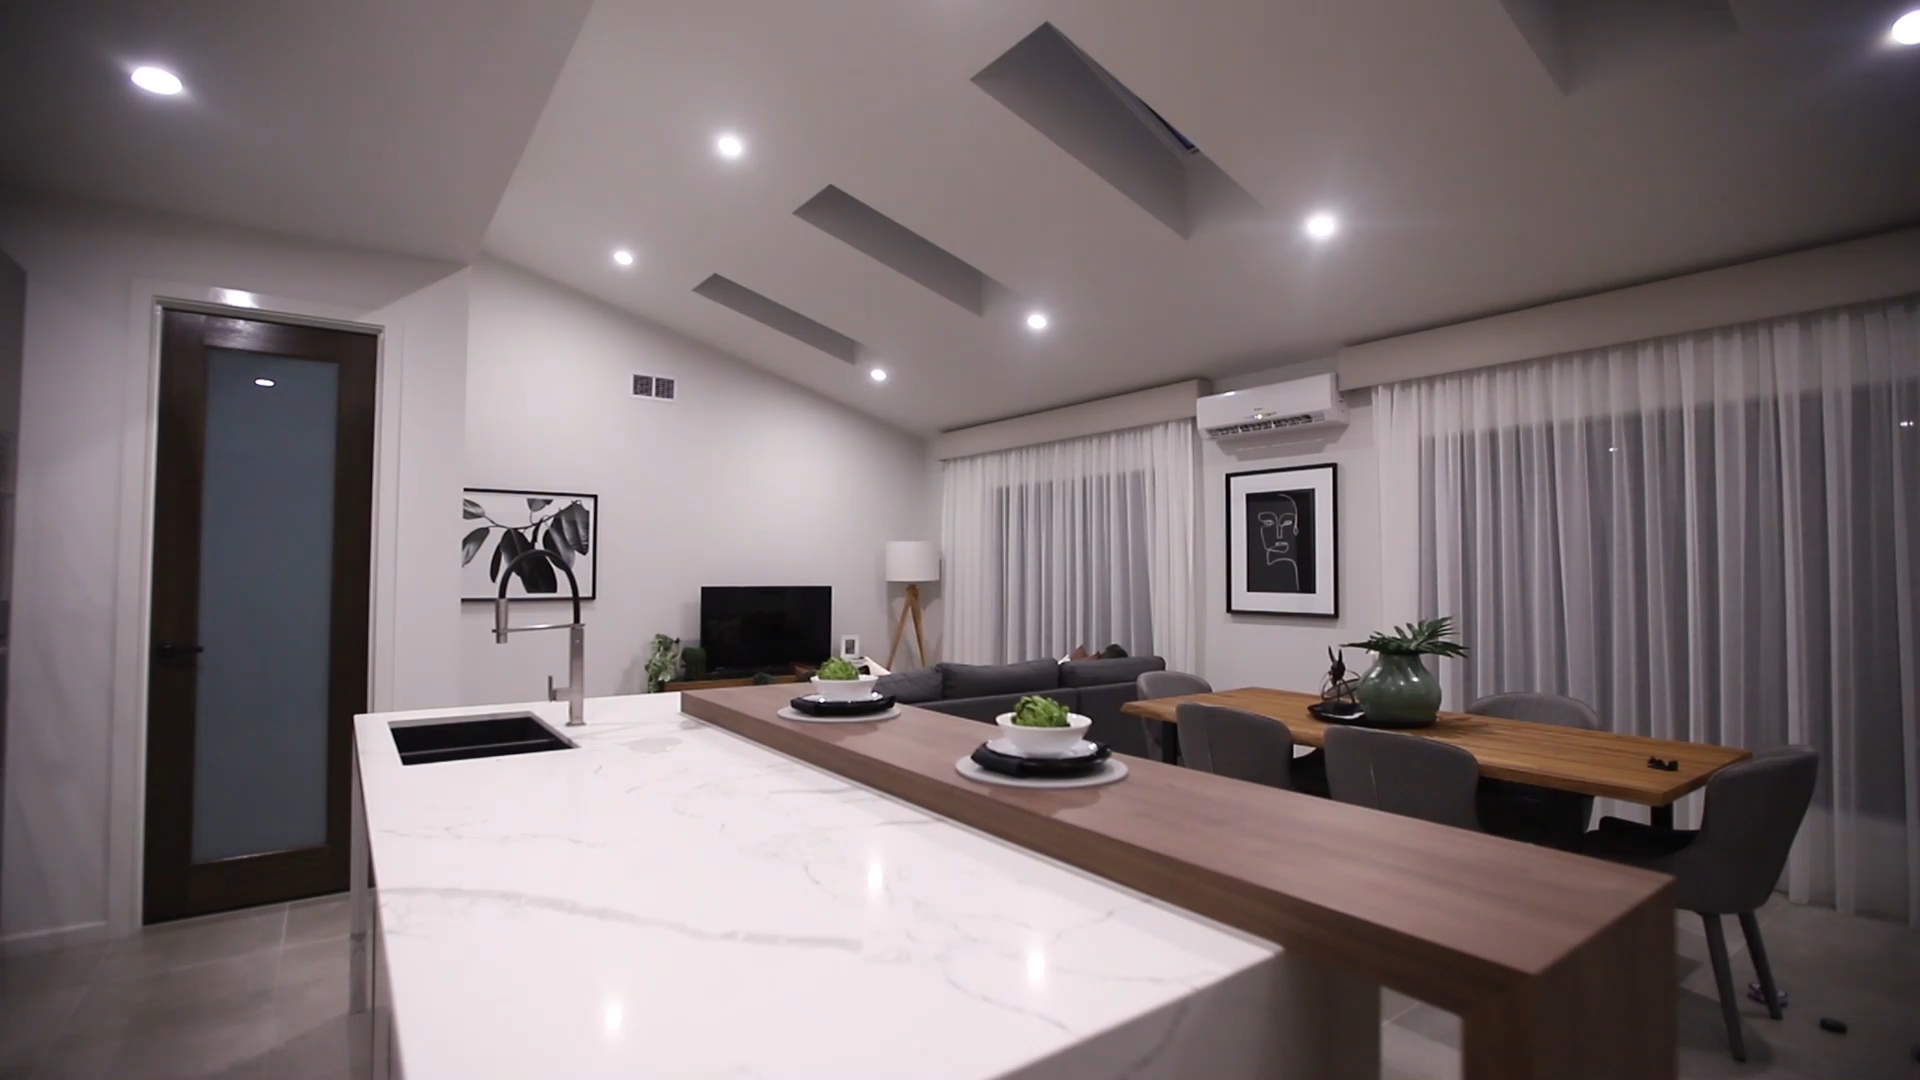 Chicago House - Real Estate Video Production Melbourne